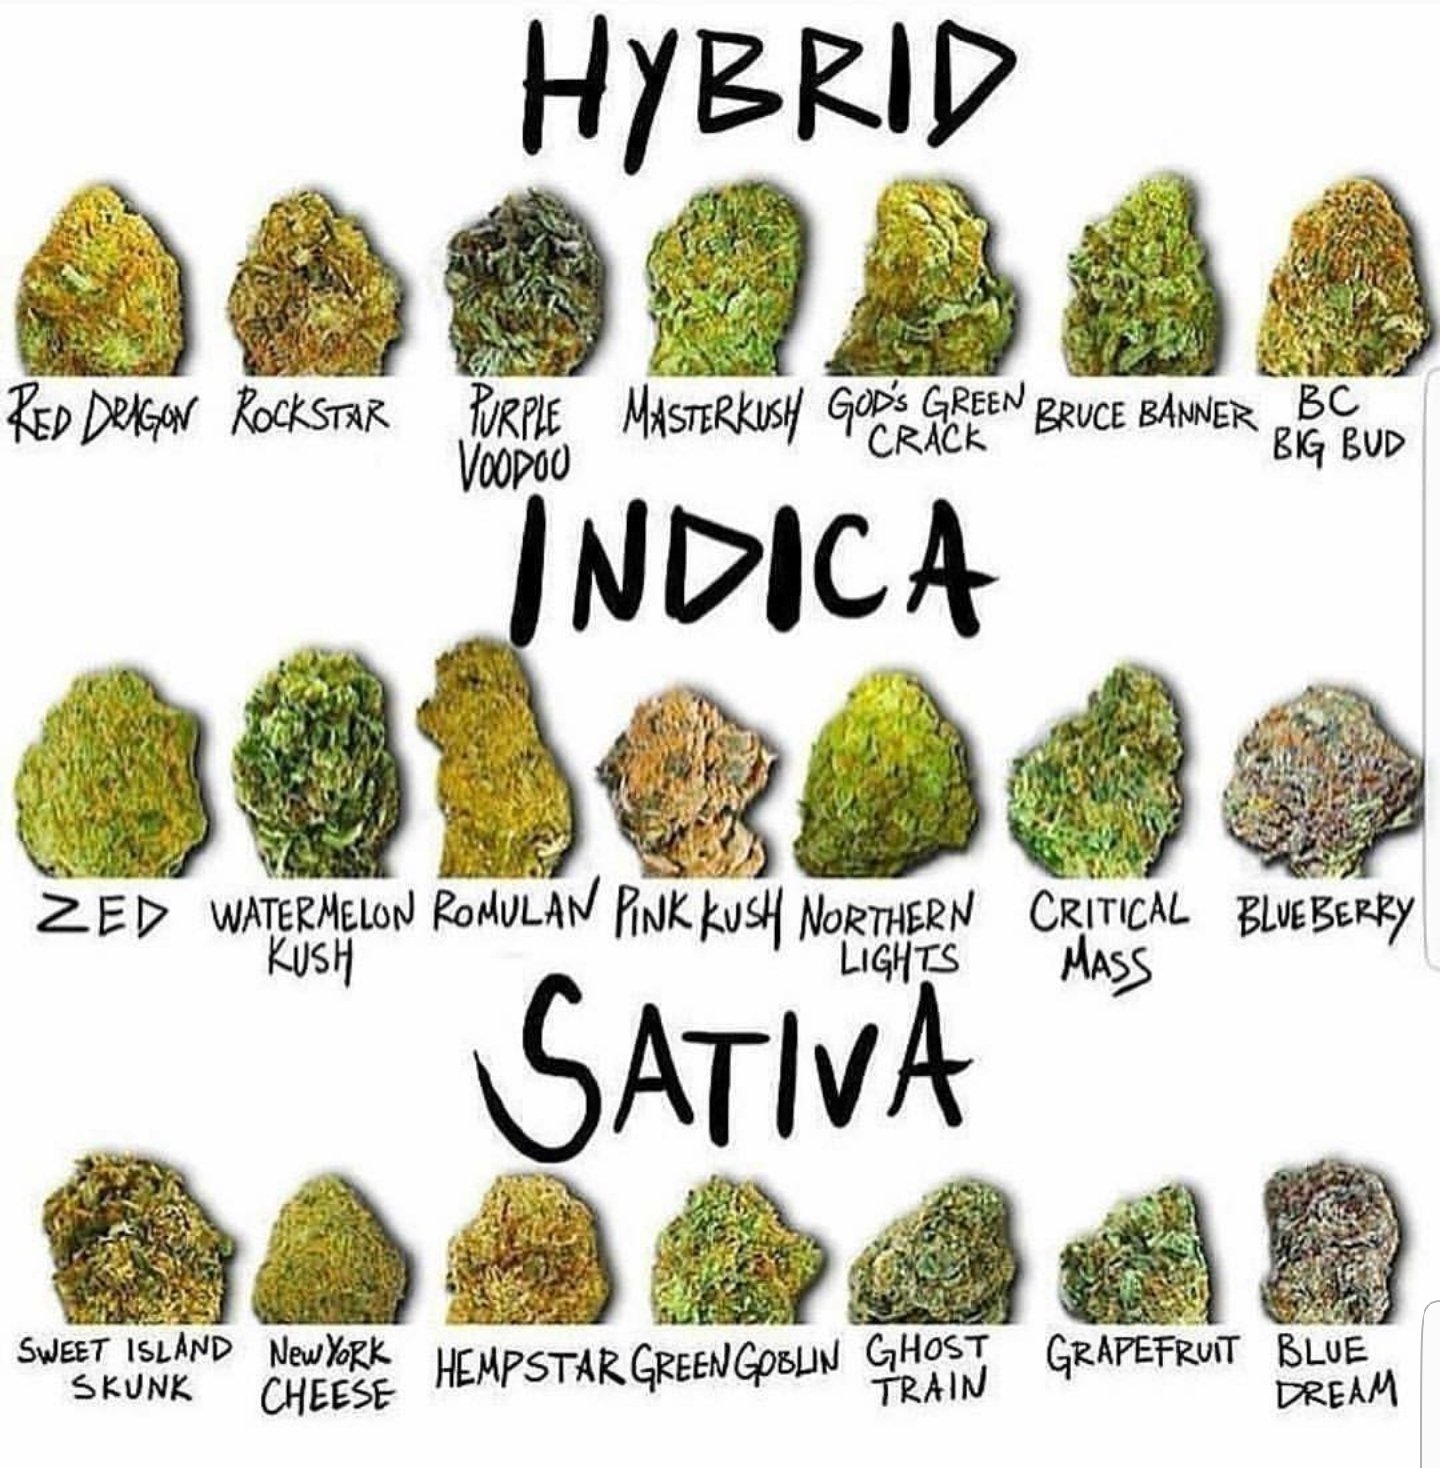 Sativa Vs Indica Chart, 7 best images about Sativa vs. Indica chart on